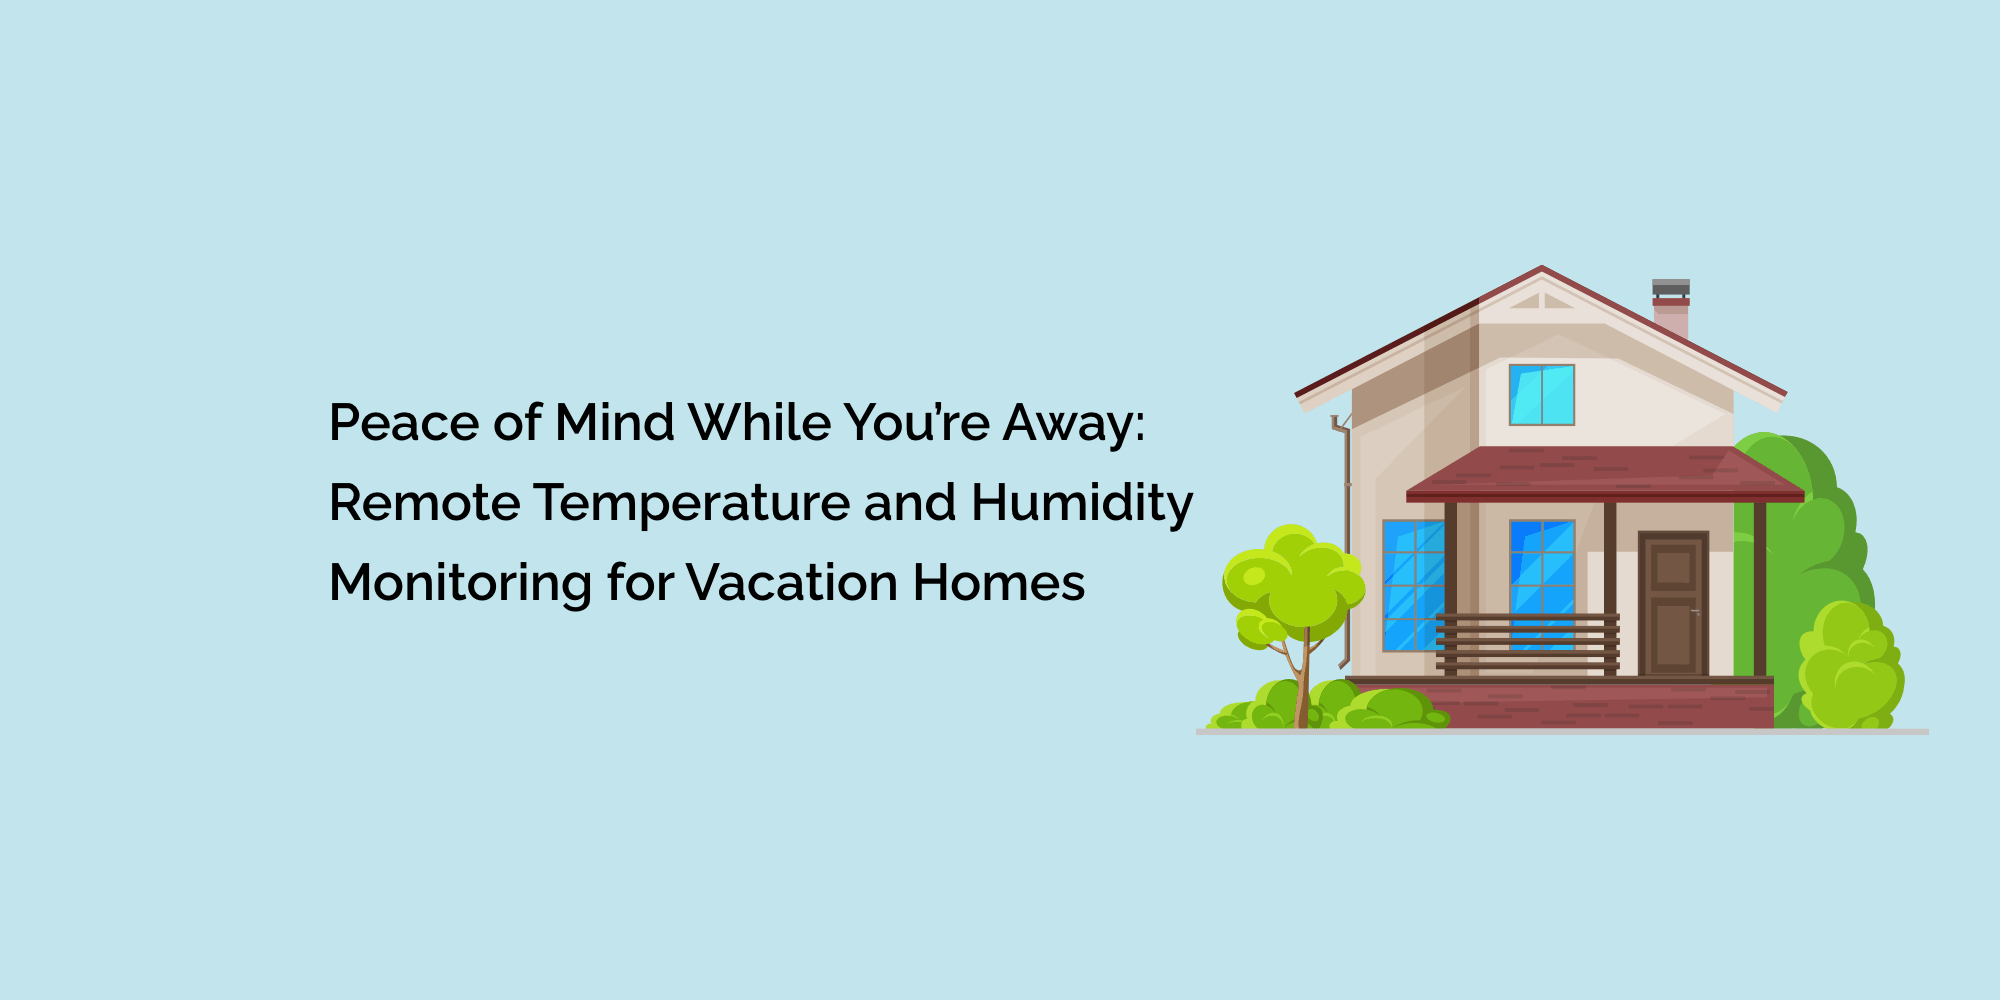 Peace of Mind While You're Away: Remote Temperature and Humidity Monitoring for Vacation Homes